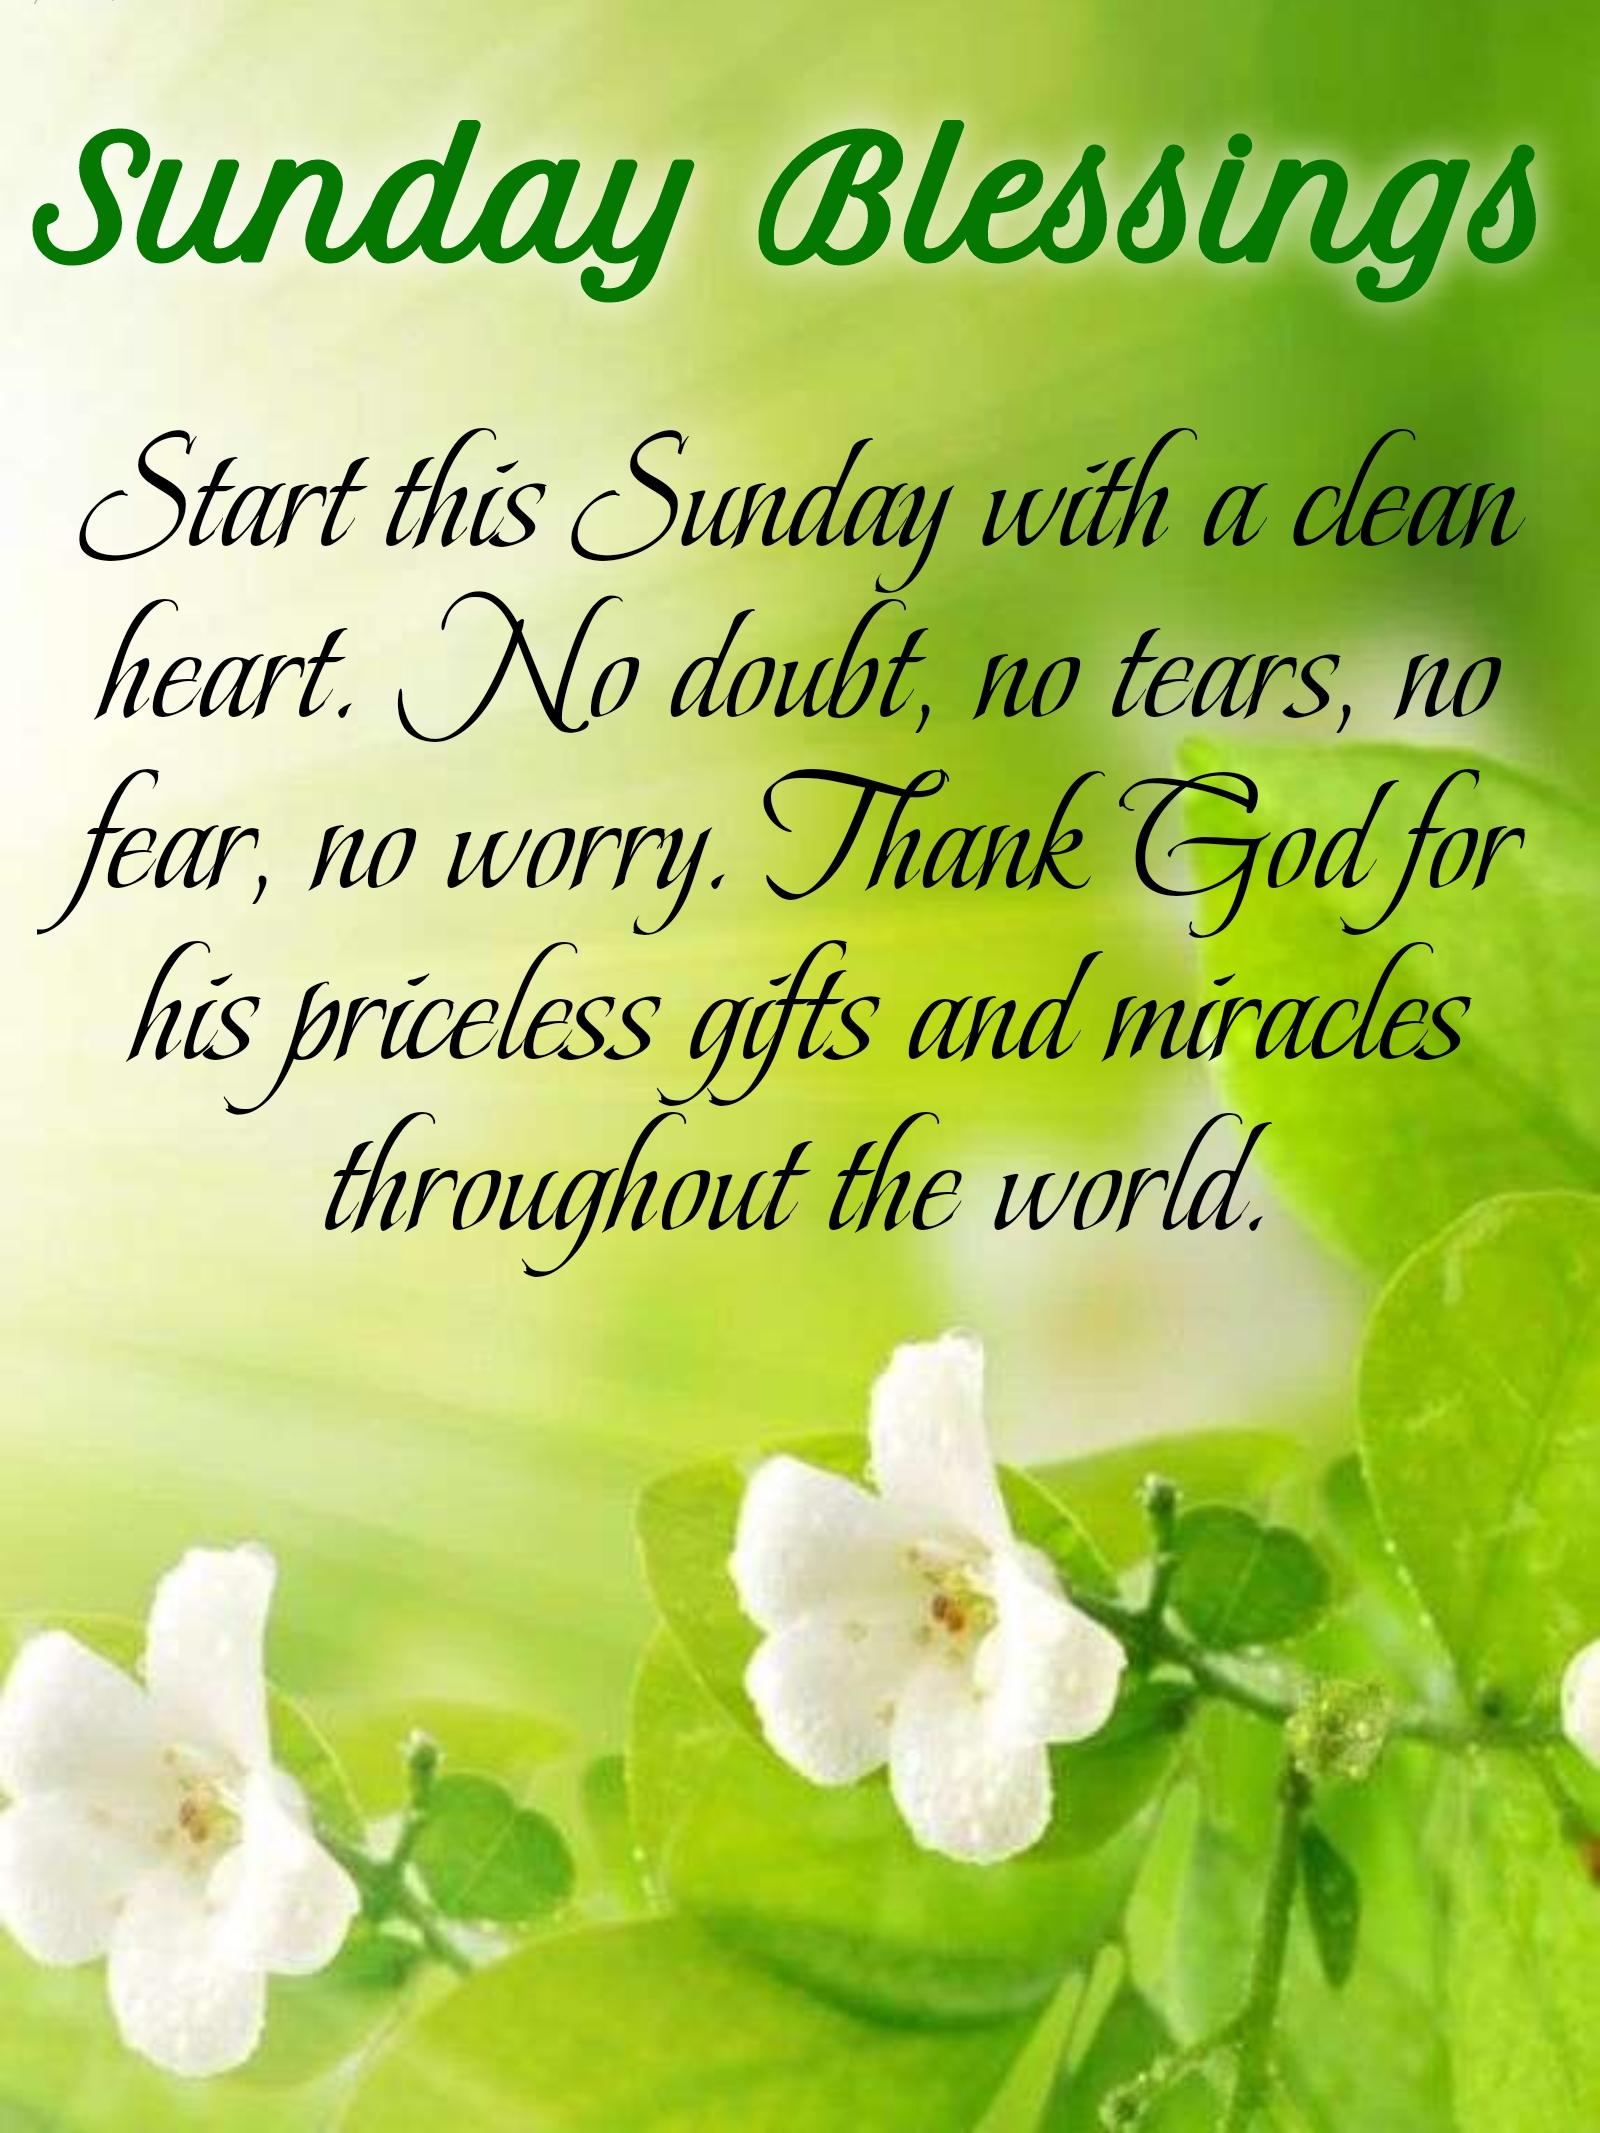 Start this Sunday with a clean heart No doubt no tears no fear no worry